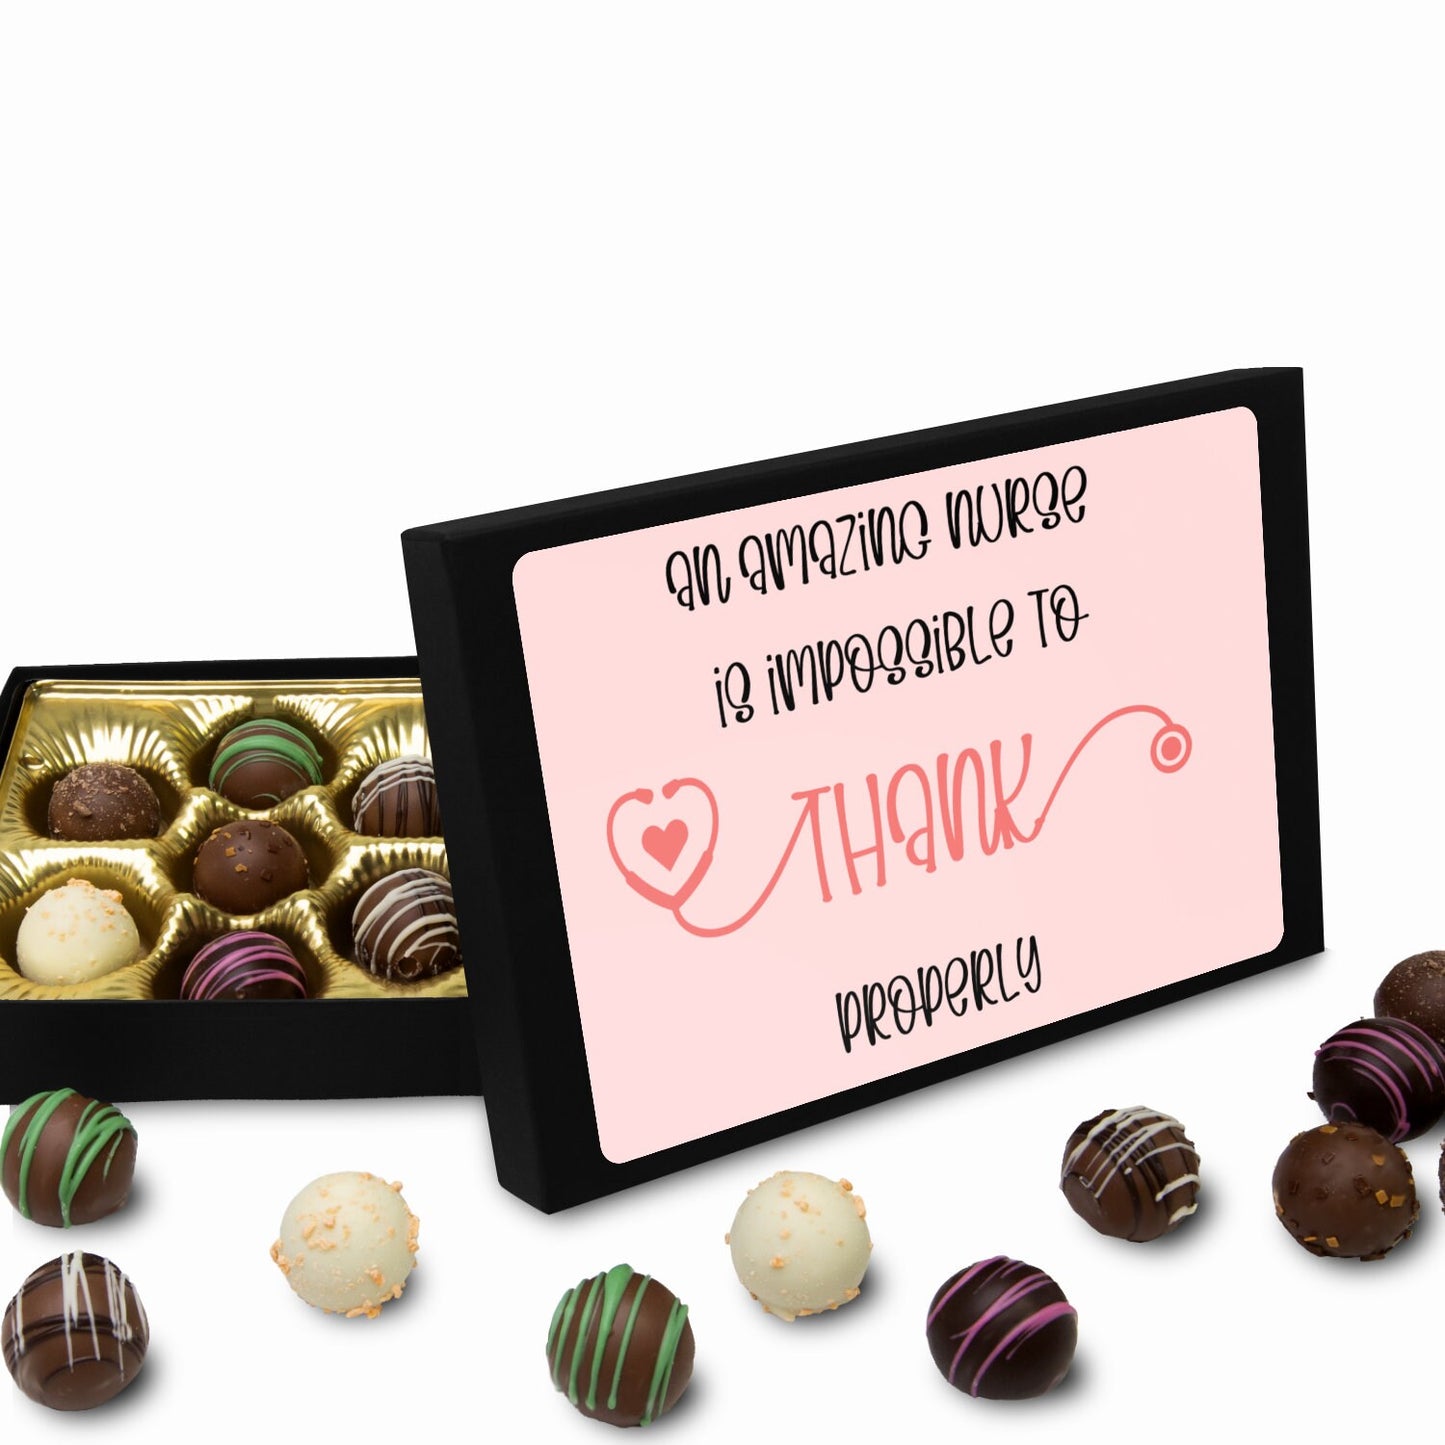 Nurse Thank You Gift, Personalized Chocolate Box Gift, Chocolate Truffles, Nurse Appreciation Gift, Nurse, Medical Thank You Gifts